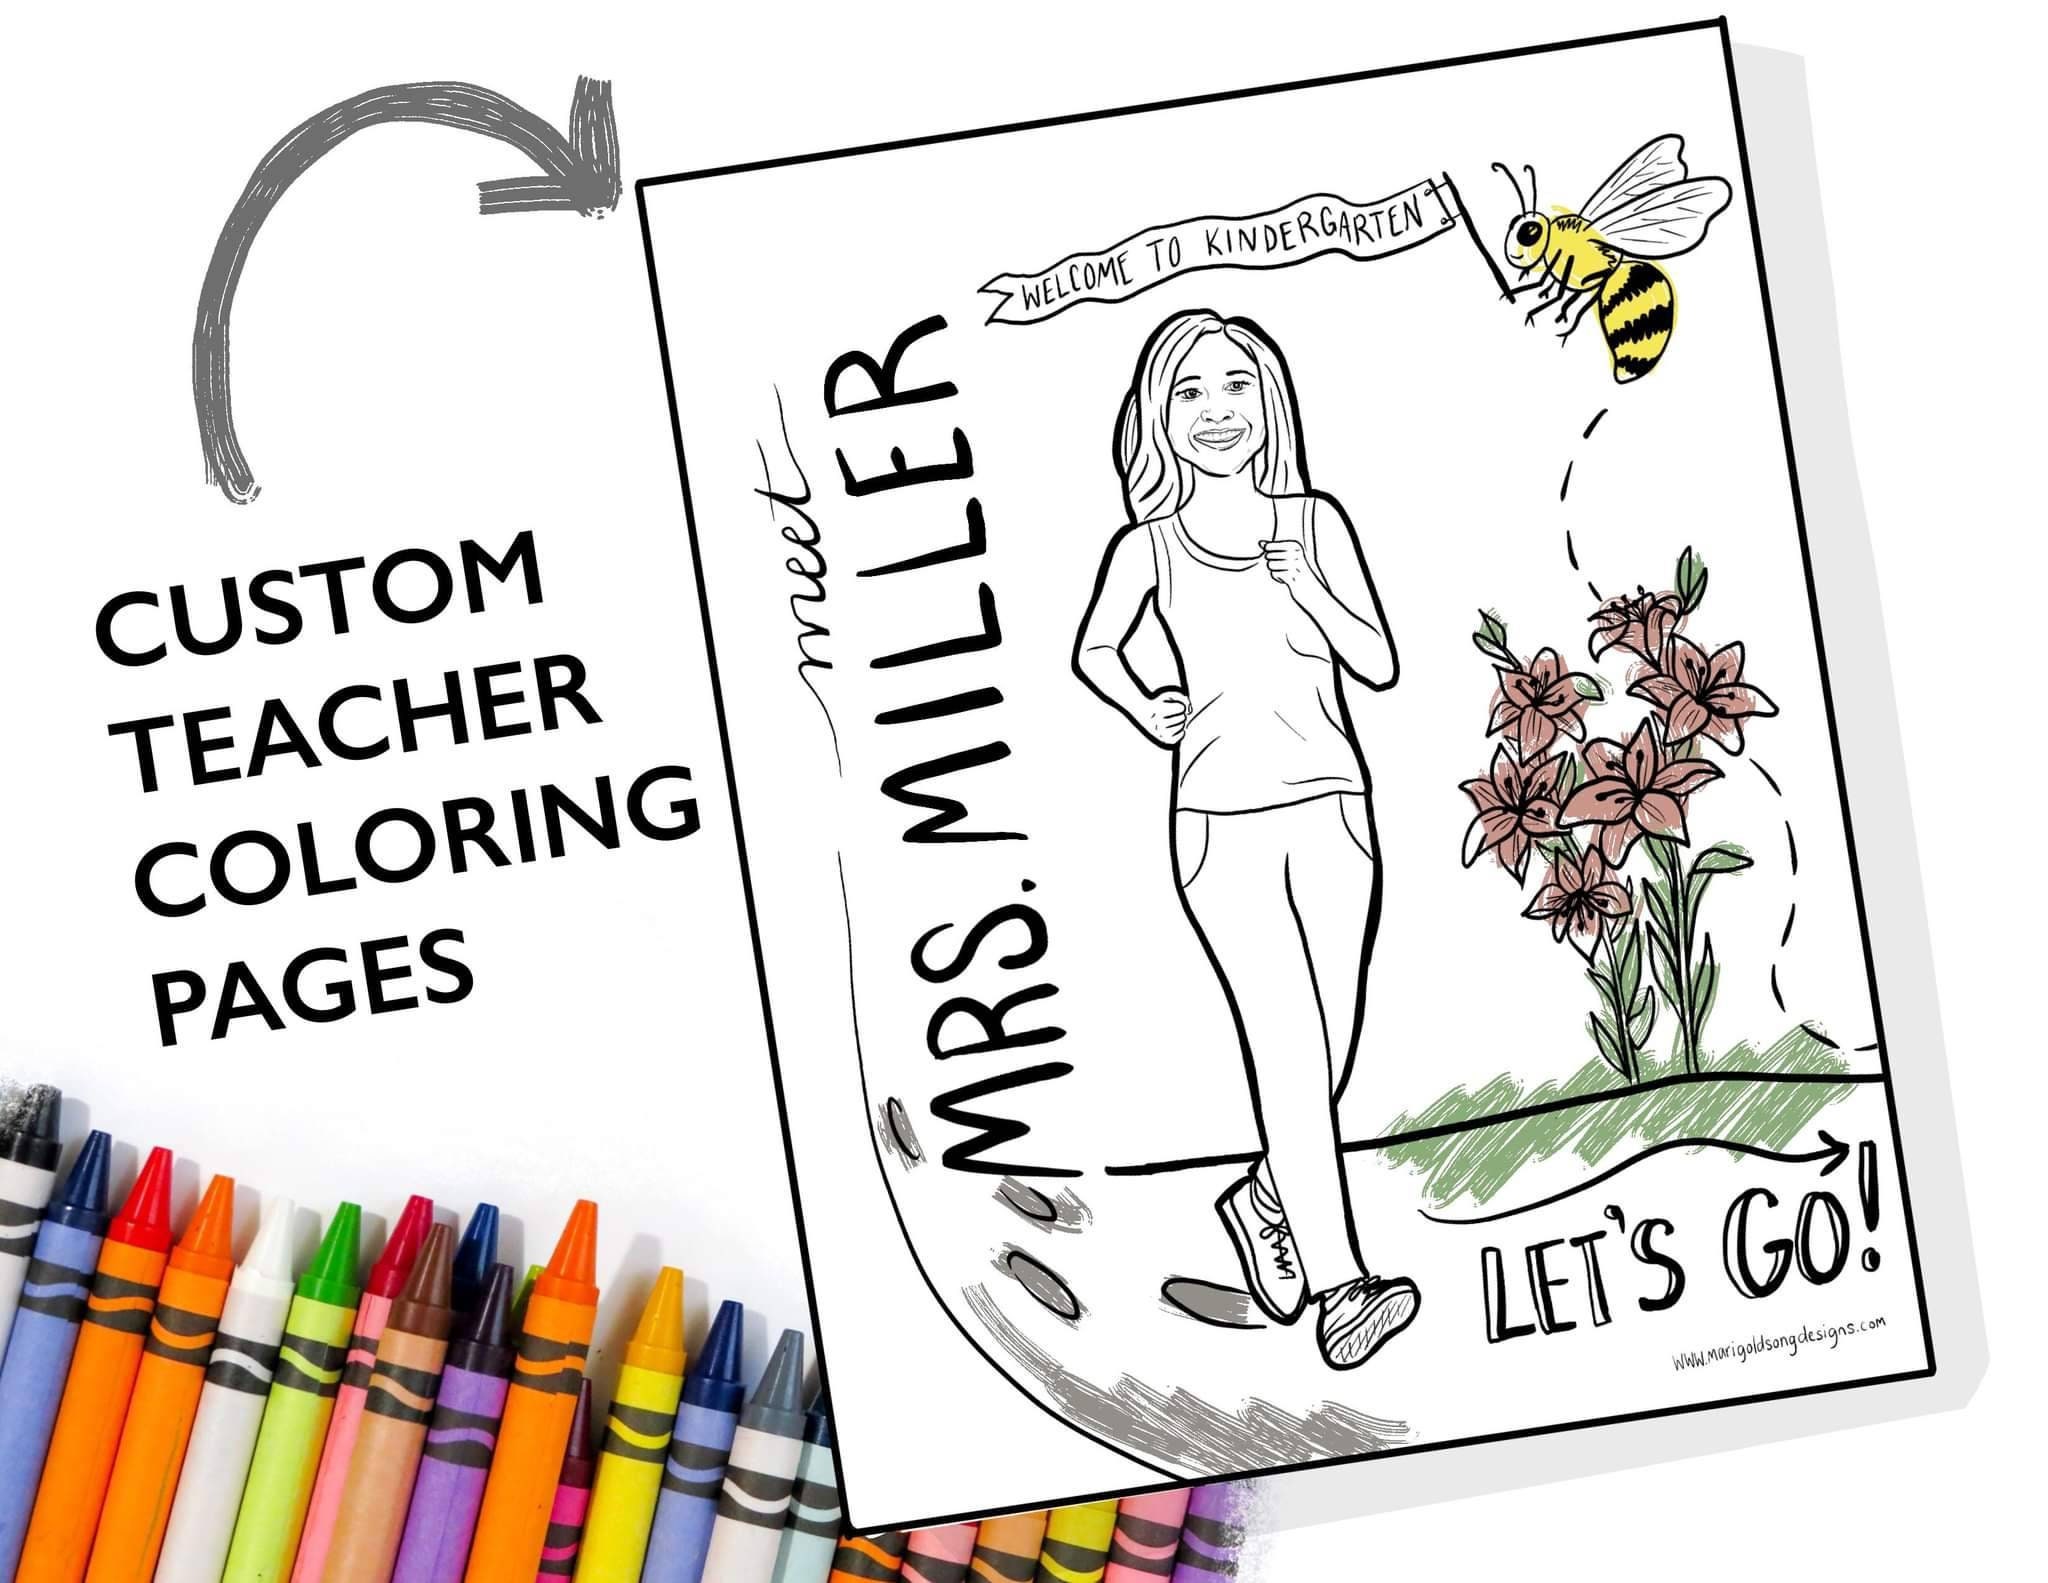 Meet the teacher coloring pages teacher appreciation gift gift for teacher gift for para school coloring page custom coloring page